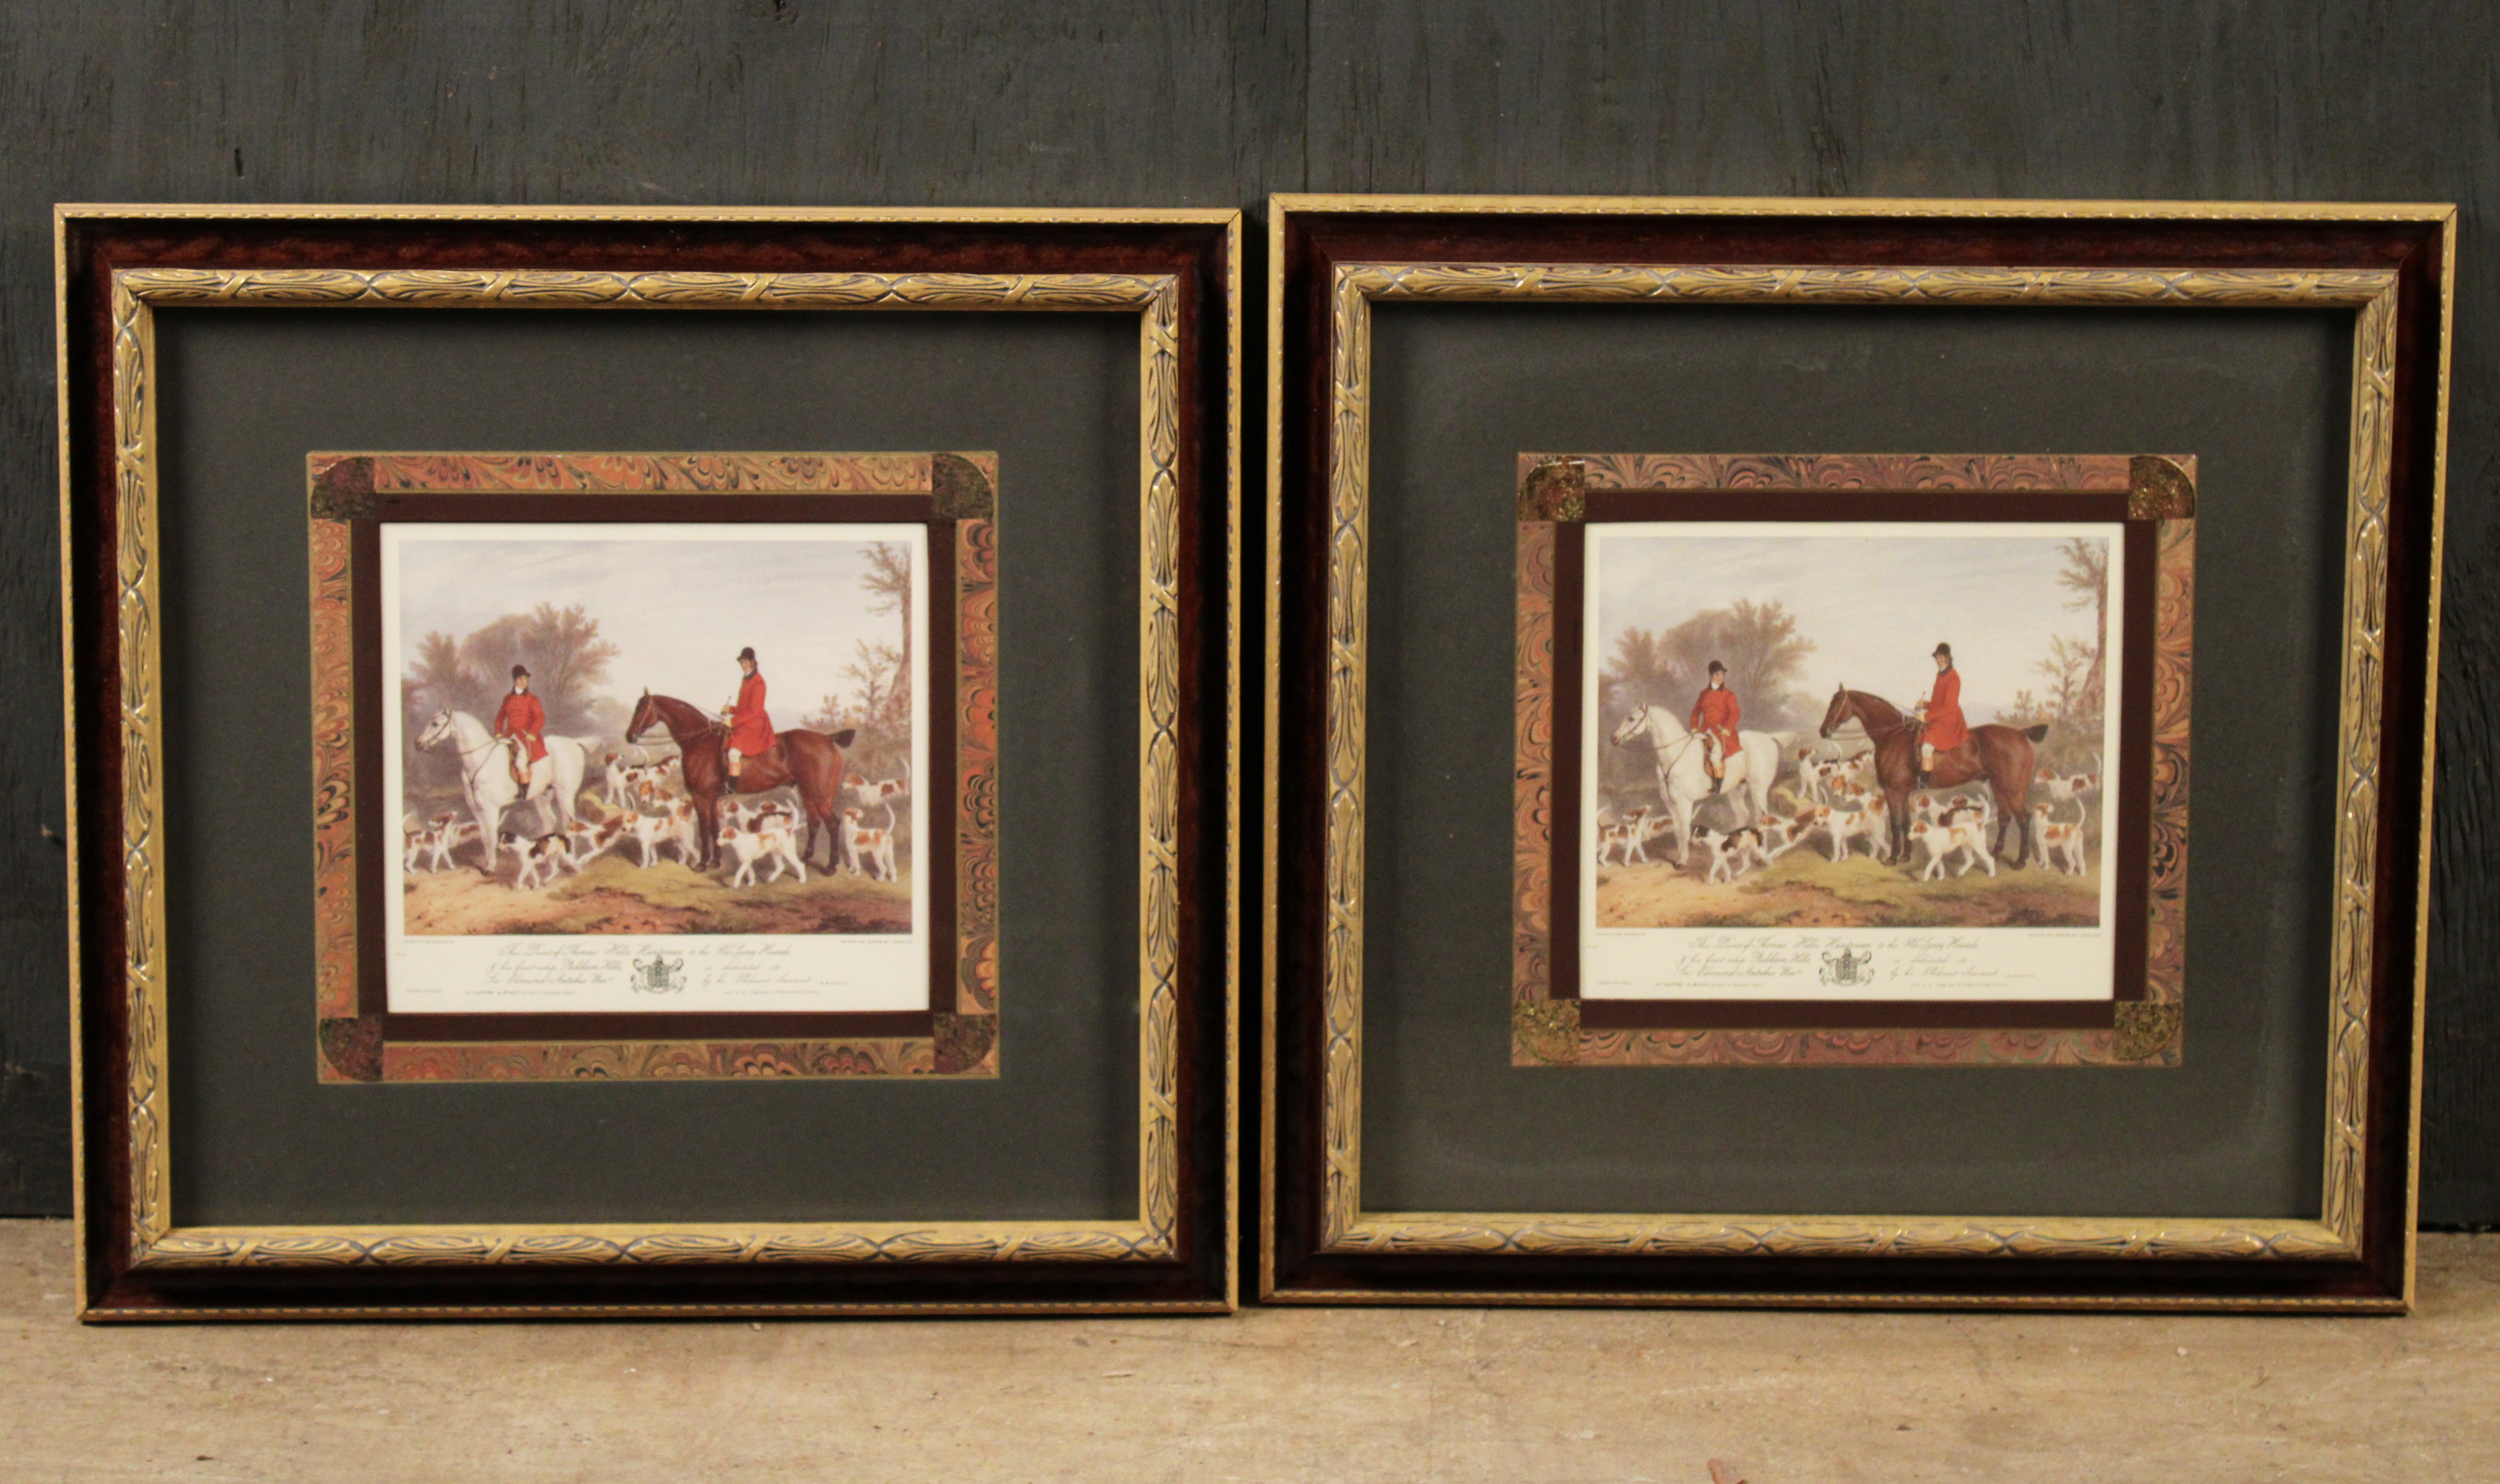 PAIR OF FOXHUNT LITHOGRAPHS AFTER 35fce0